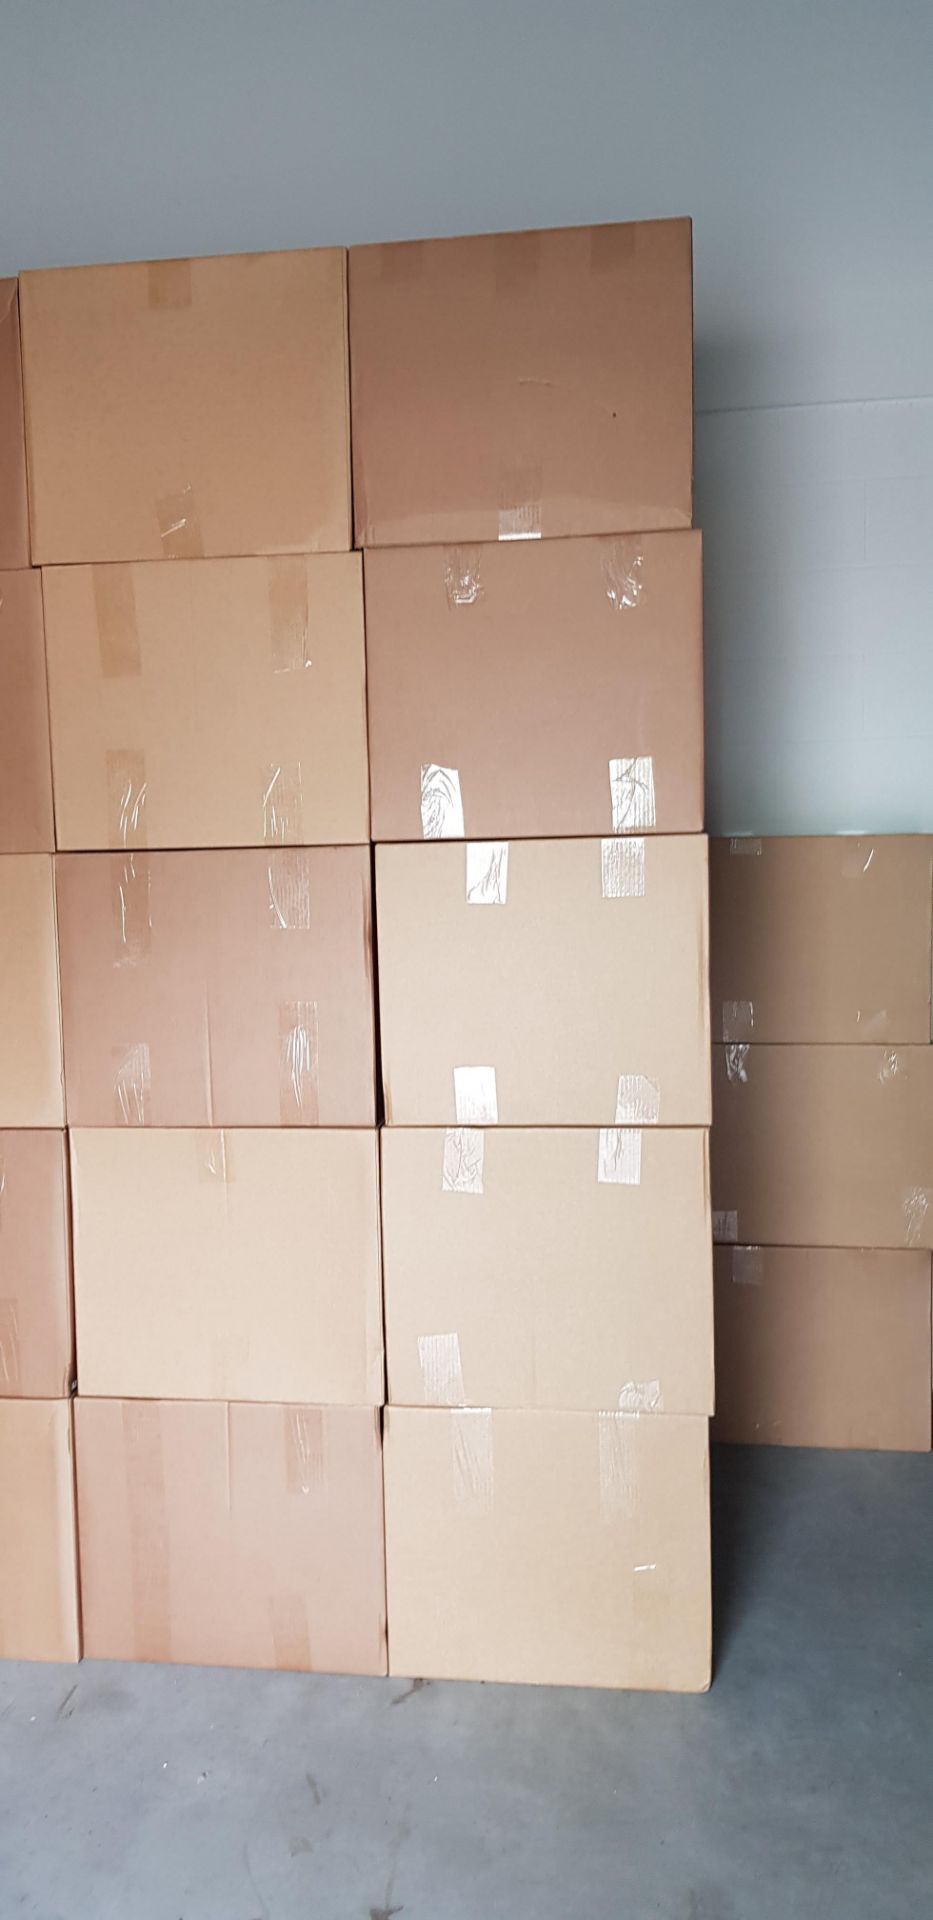 1 PALLET OF FACE MASKS, 10,560 INDIVIDUALLY SEALED MASKS IN TOTAL, FFP2 GERMANY QUALITY MADE - Image 5 of 6